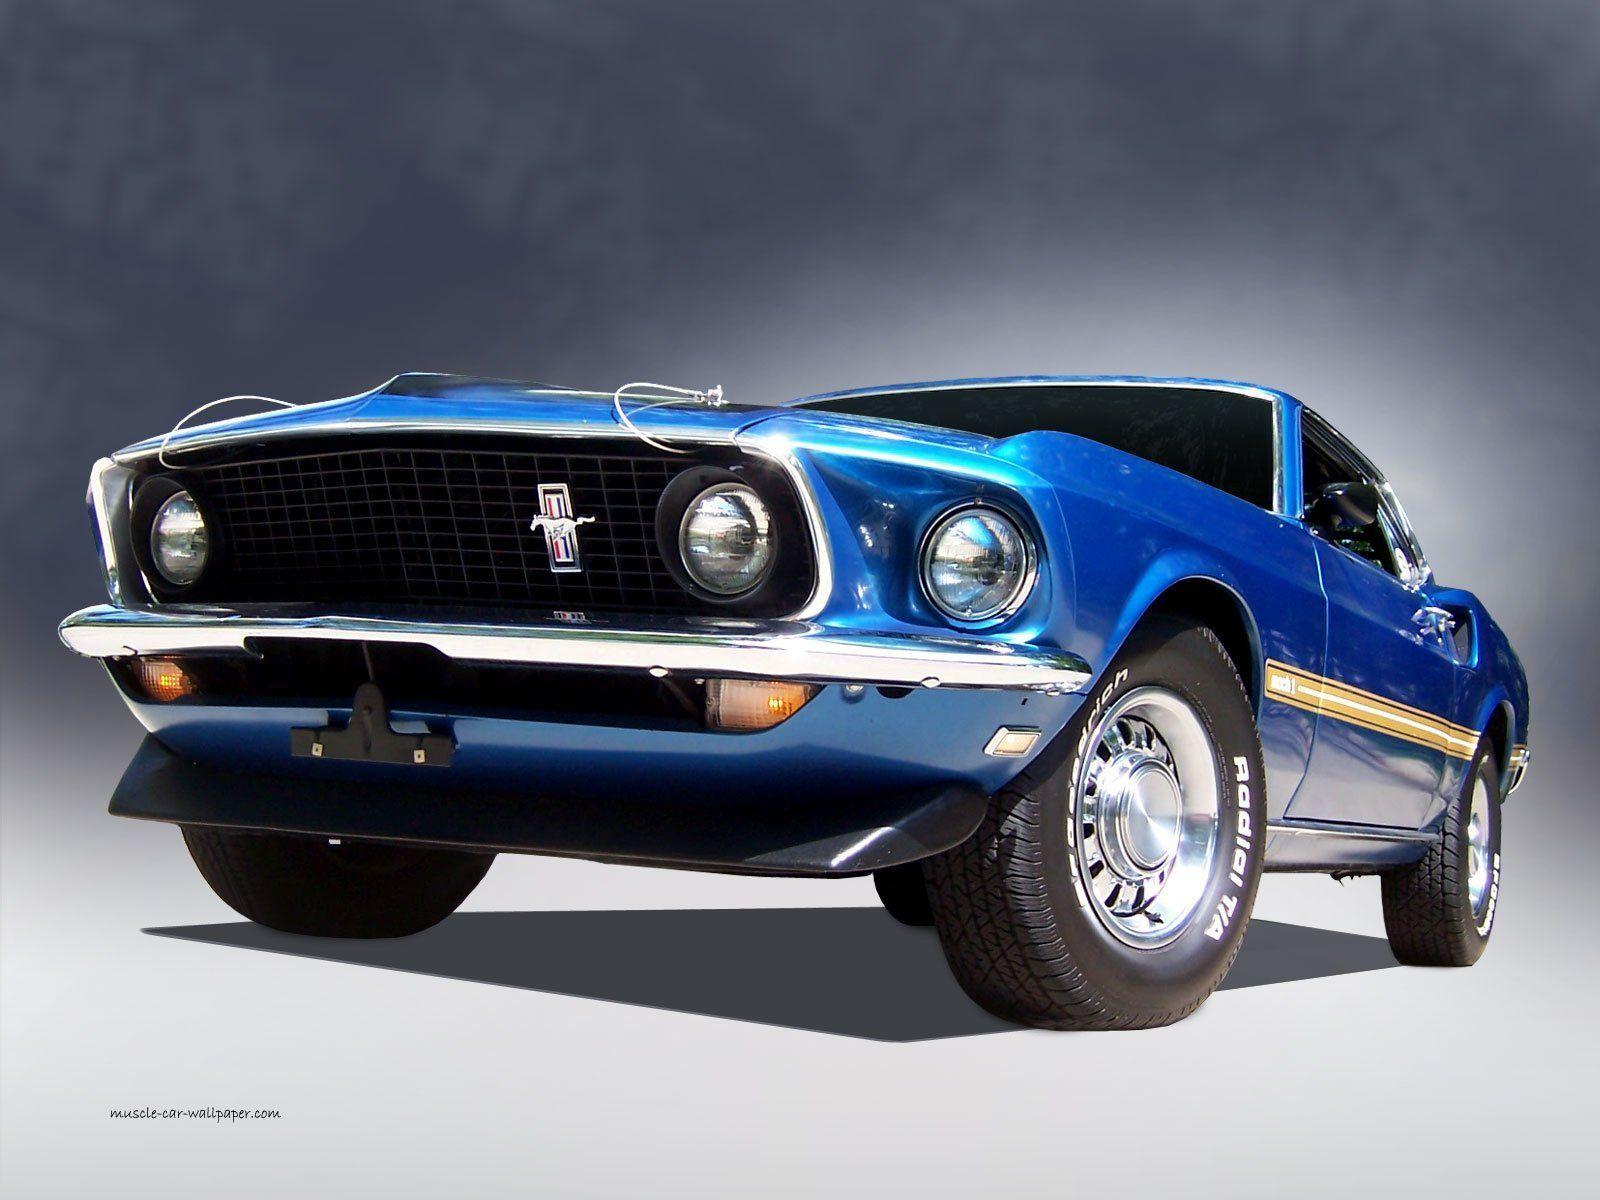 1969 Ford Mustang Mach 1 HD Wallpaper. Background